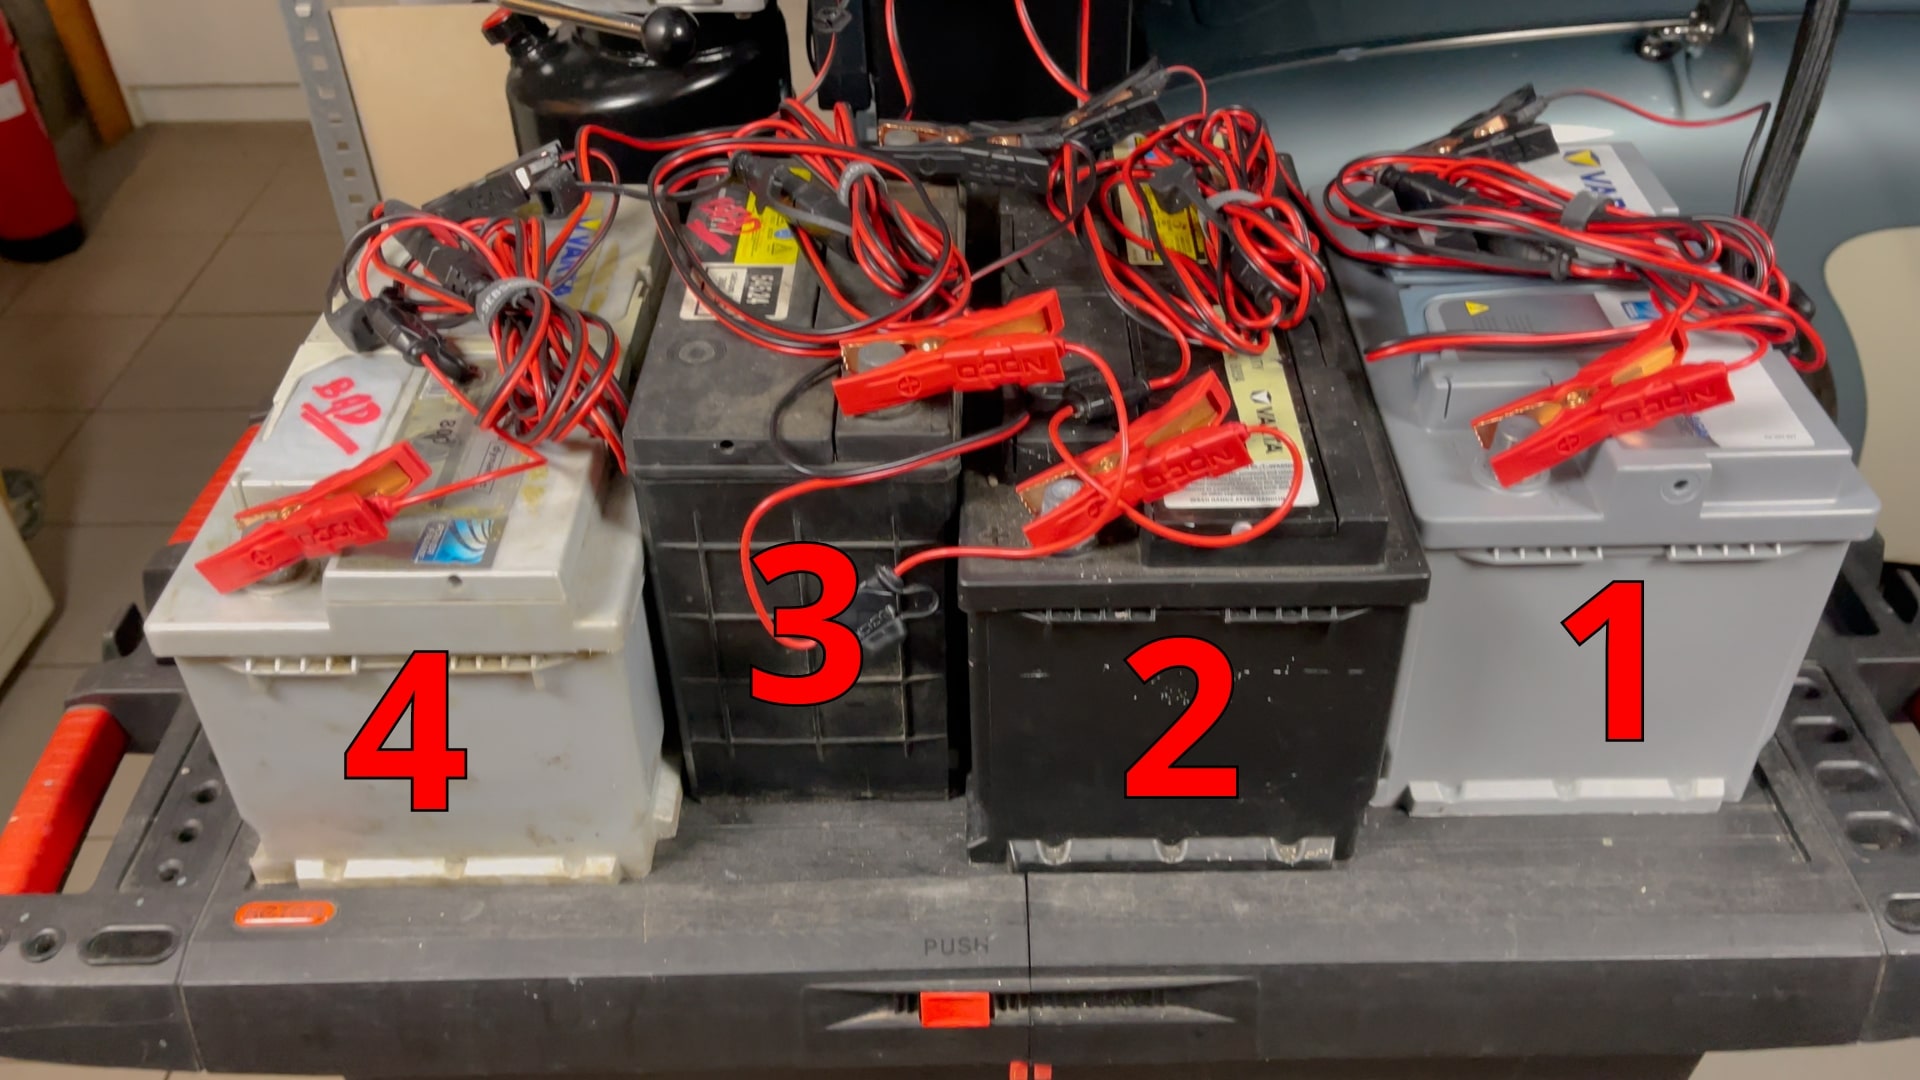 The test setup of four different car batteries that are used to test the battery tester